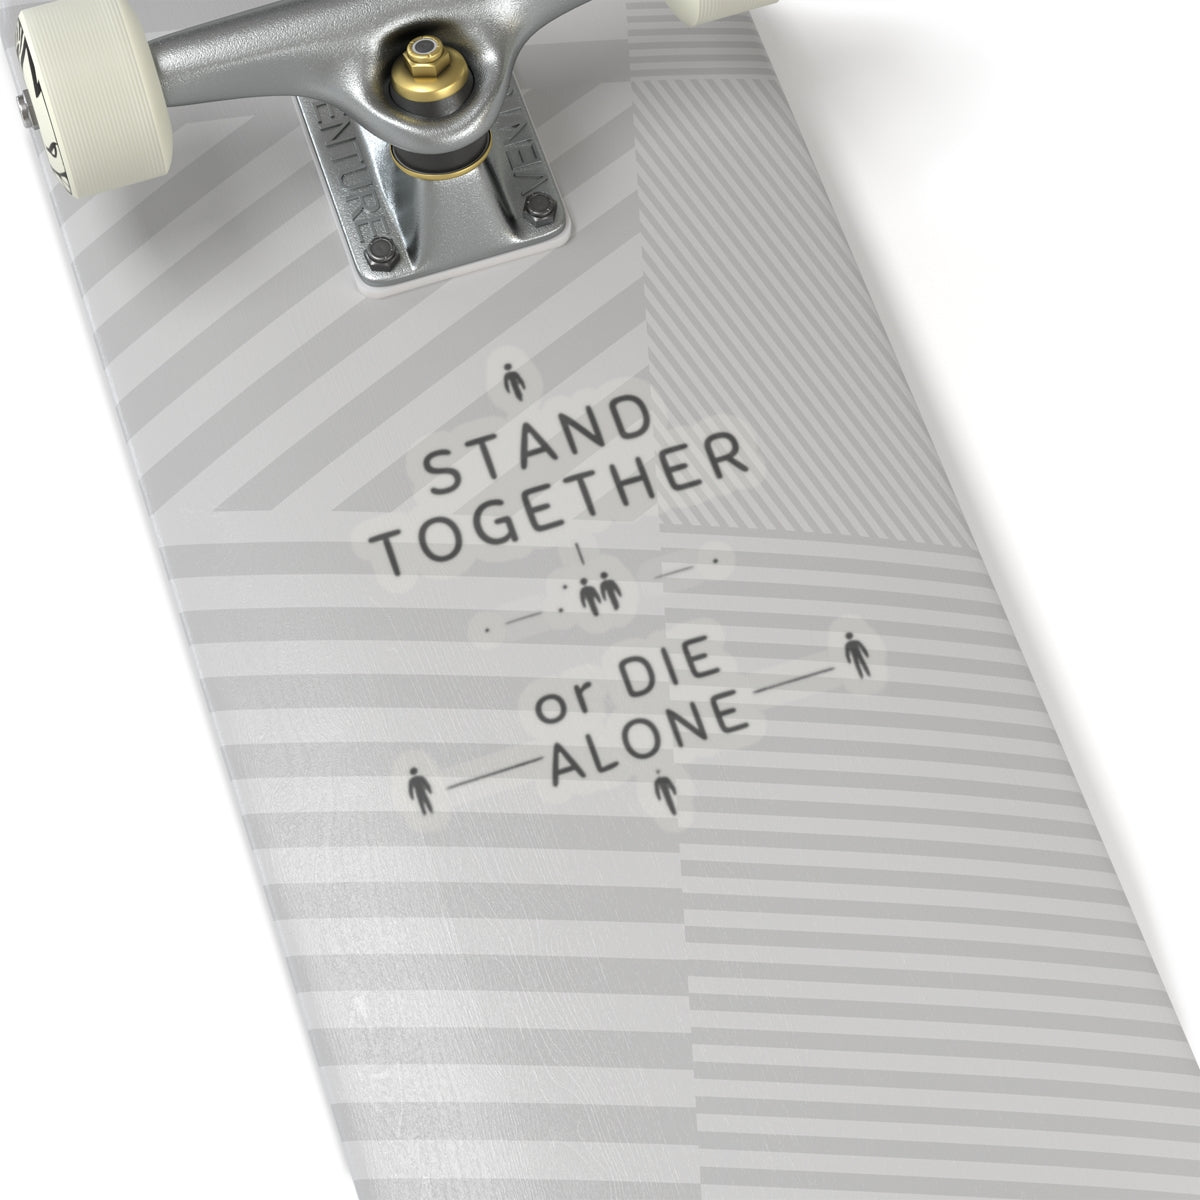 Stand together or Die Alone Stickers